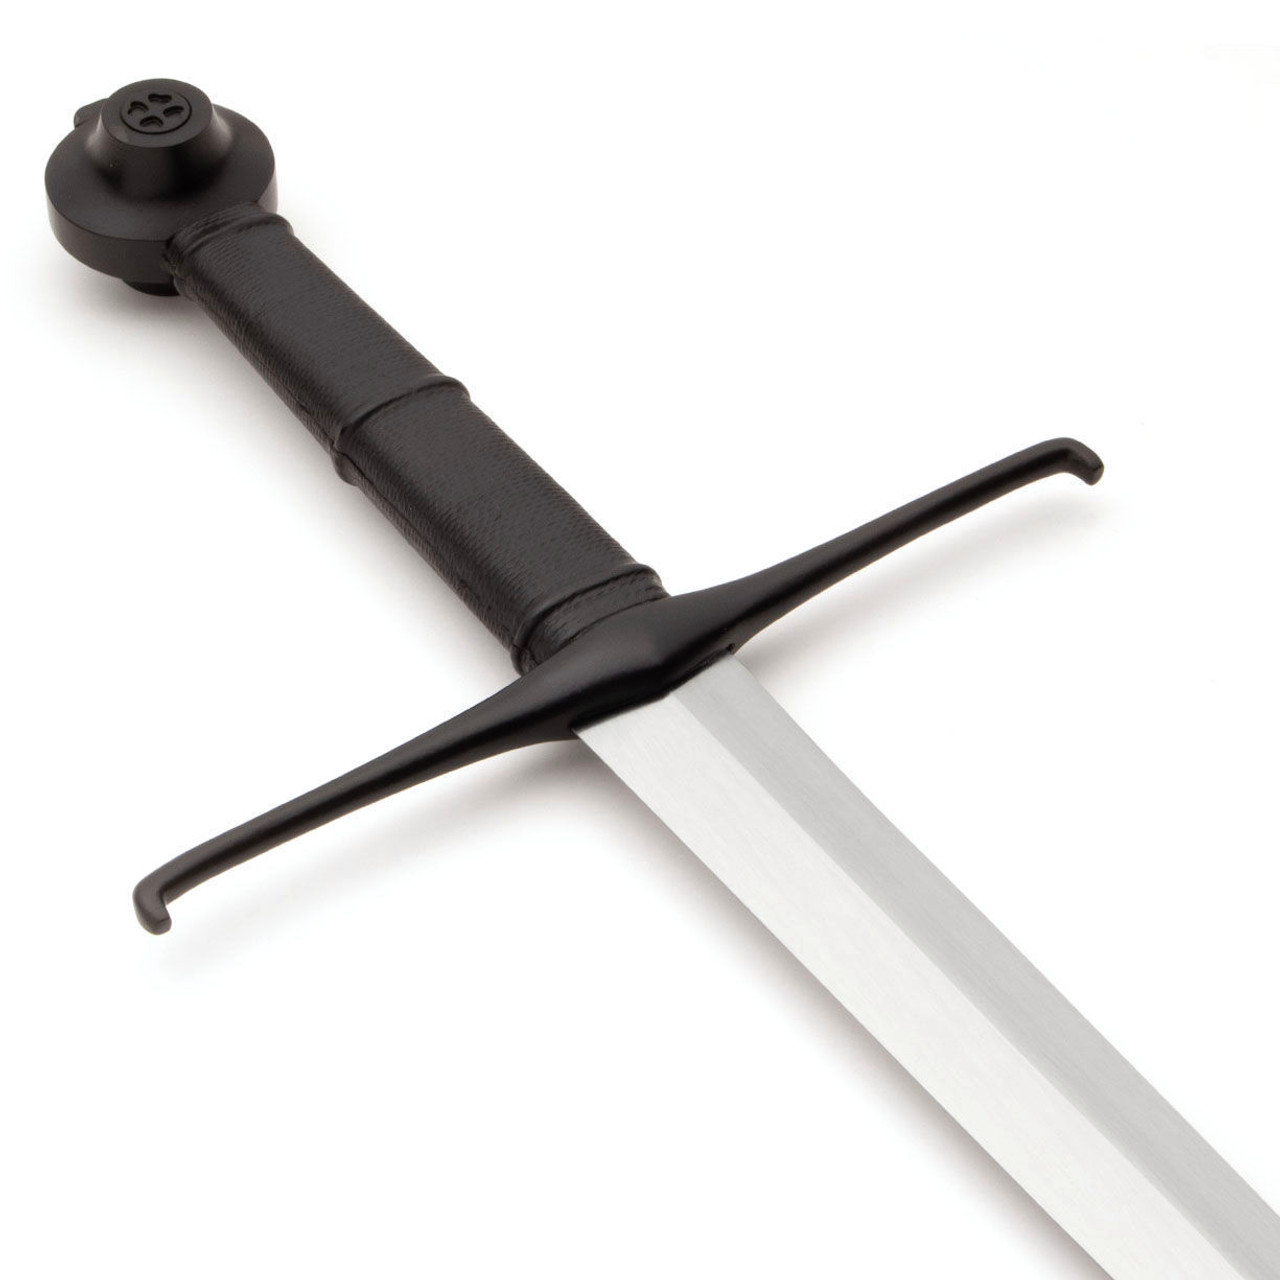 Windlass Black Prince Medieval Sword has a round pommel, leather wrapped grip and straight quillons with a downturn